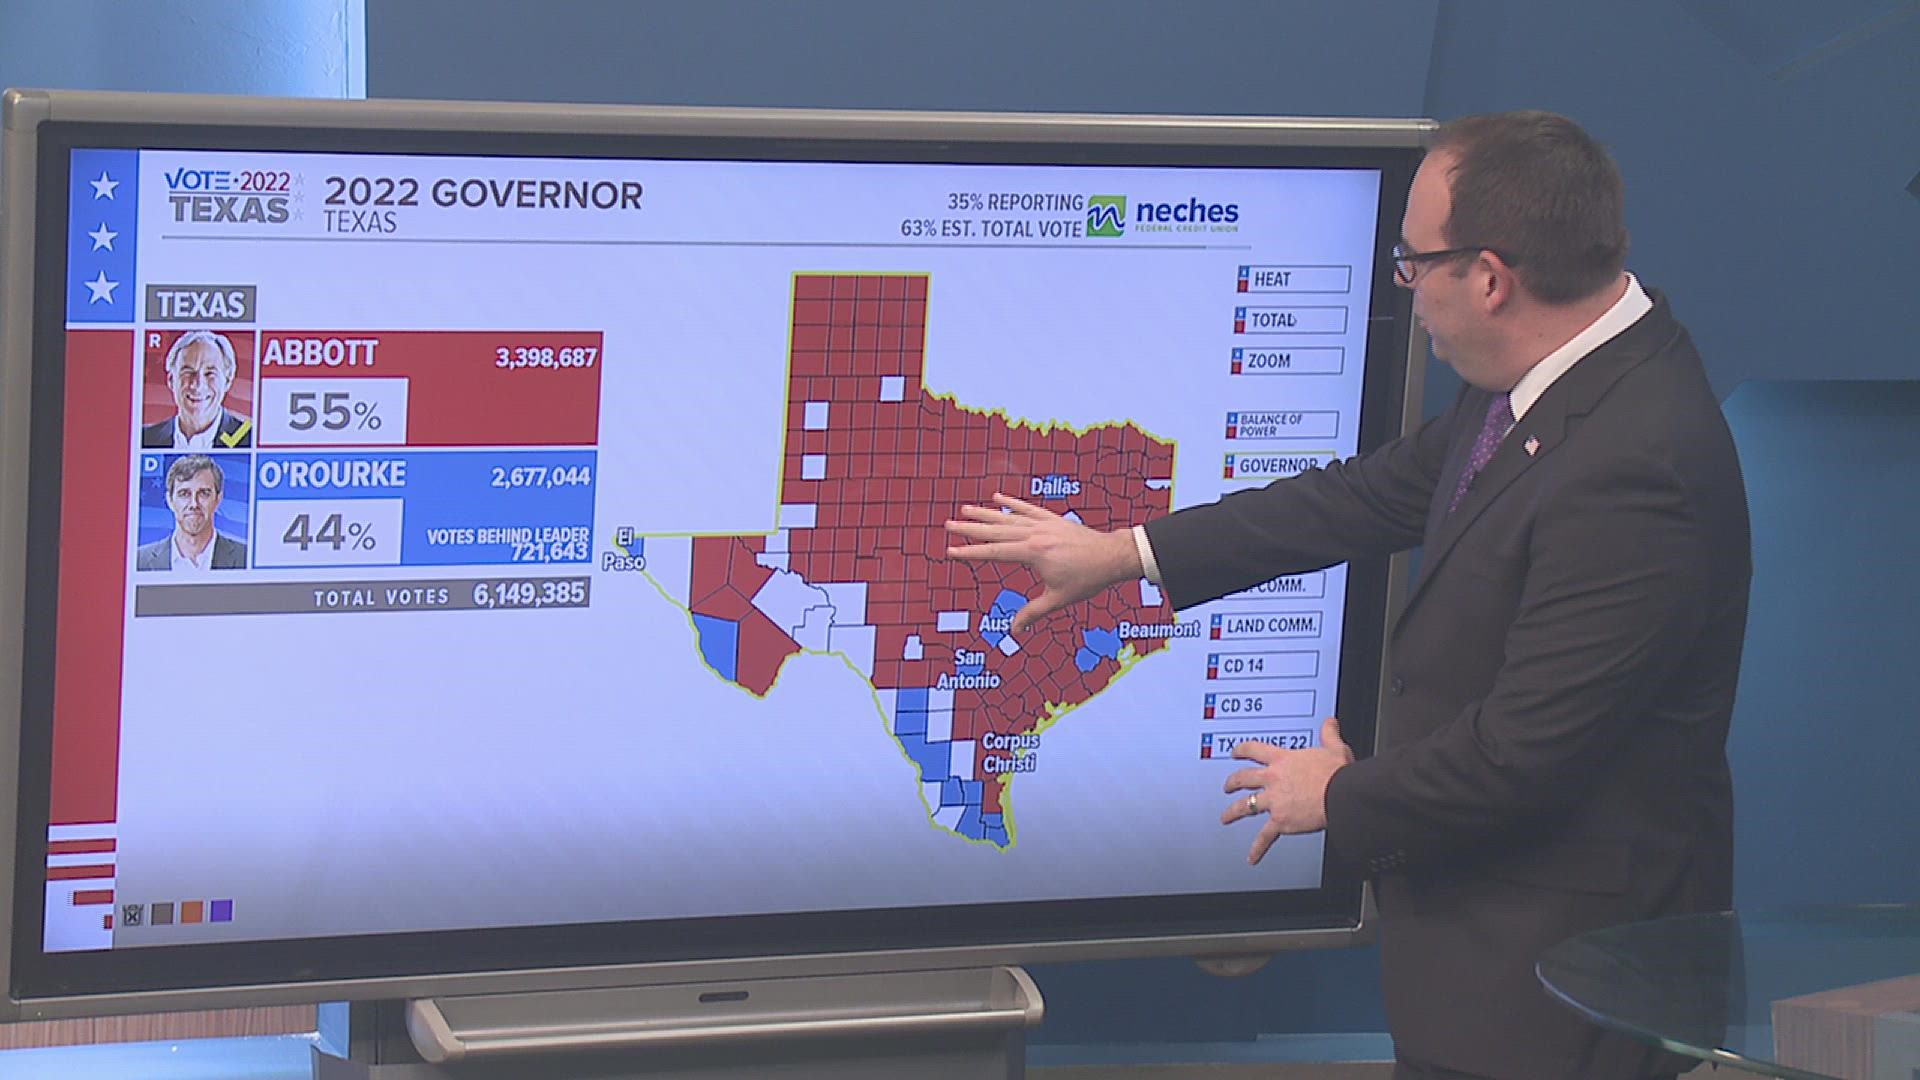 Incumbent Greg Abbott (R) will soon serve his third term, according to multiple network projections.